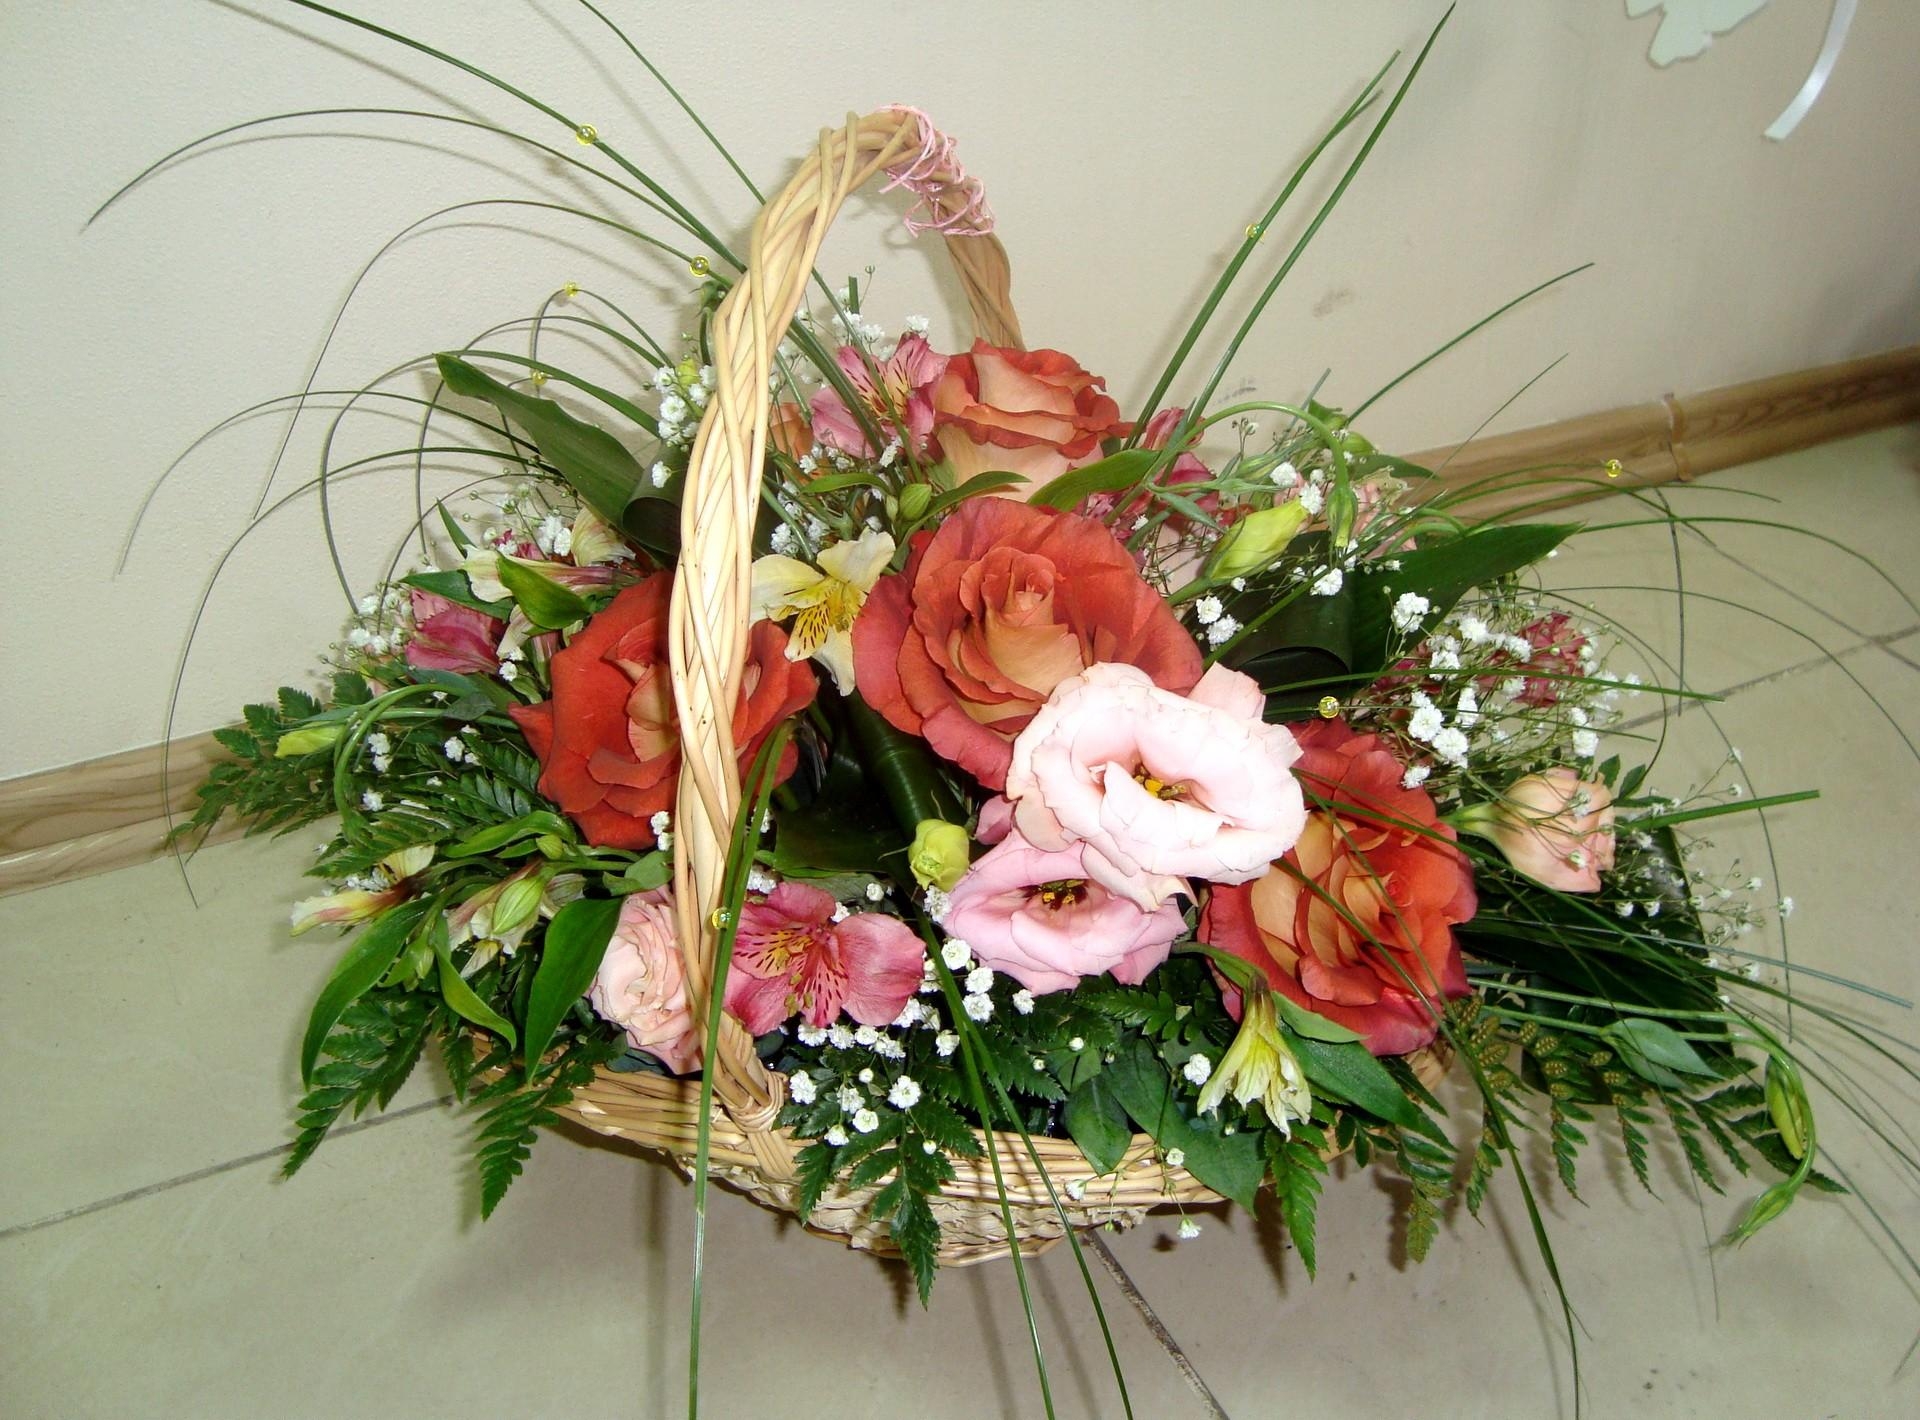 flowers, roses, fern, alstroemeria, gypsophilus, gipsophile, basket, composition, lisianthus russell, lisiantus russell